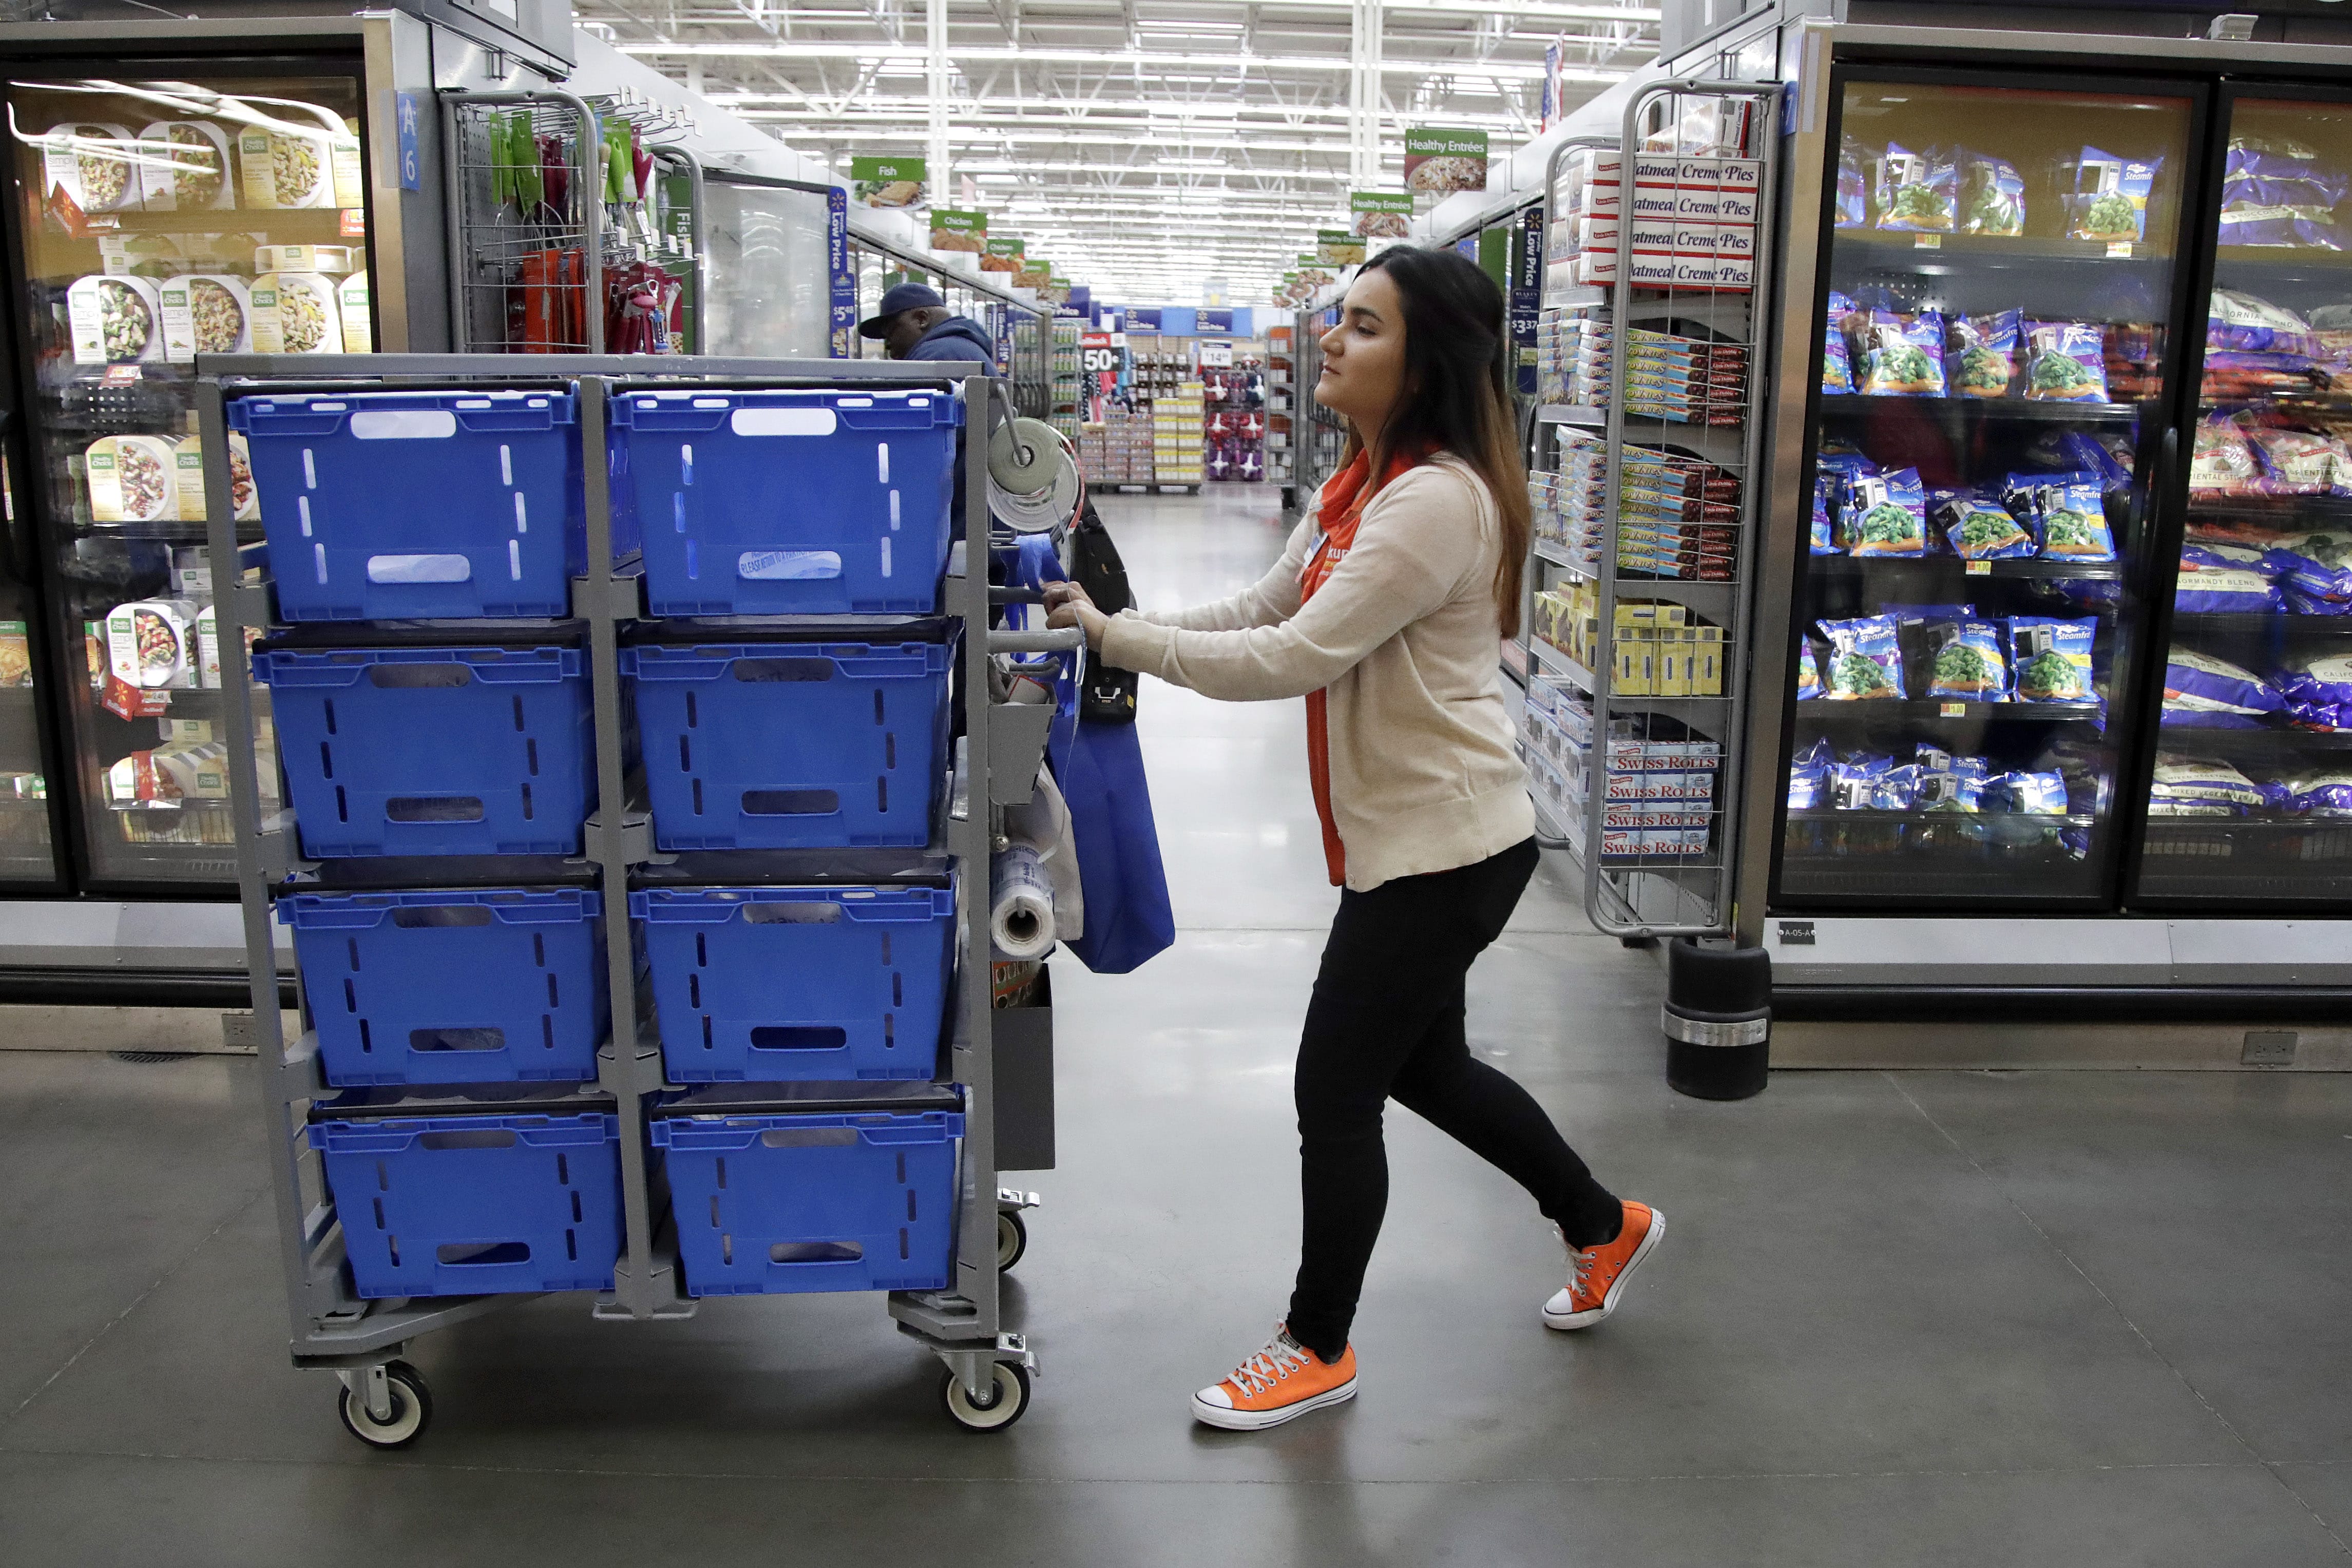 In this Thursday, Nov. 9, 2017, photo, Laila Ummelaila, a personal shopper at the Walmart store in Old Bridge, N.J., pushes a cart with bins as she shops for online shoppers. On Thursday, Jan. 11, 2018, Walmart announced it is boosting its starting salary for U.S. workers to $11 an hour, giving a one-time $1,000 cash bonus to eligible employees and expanding its maternity and parental leave benefits.